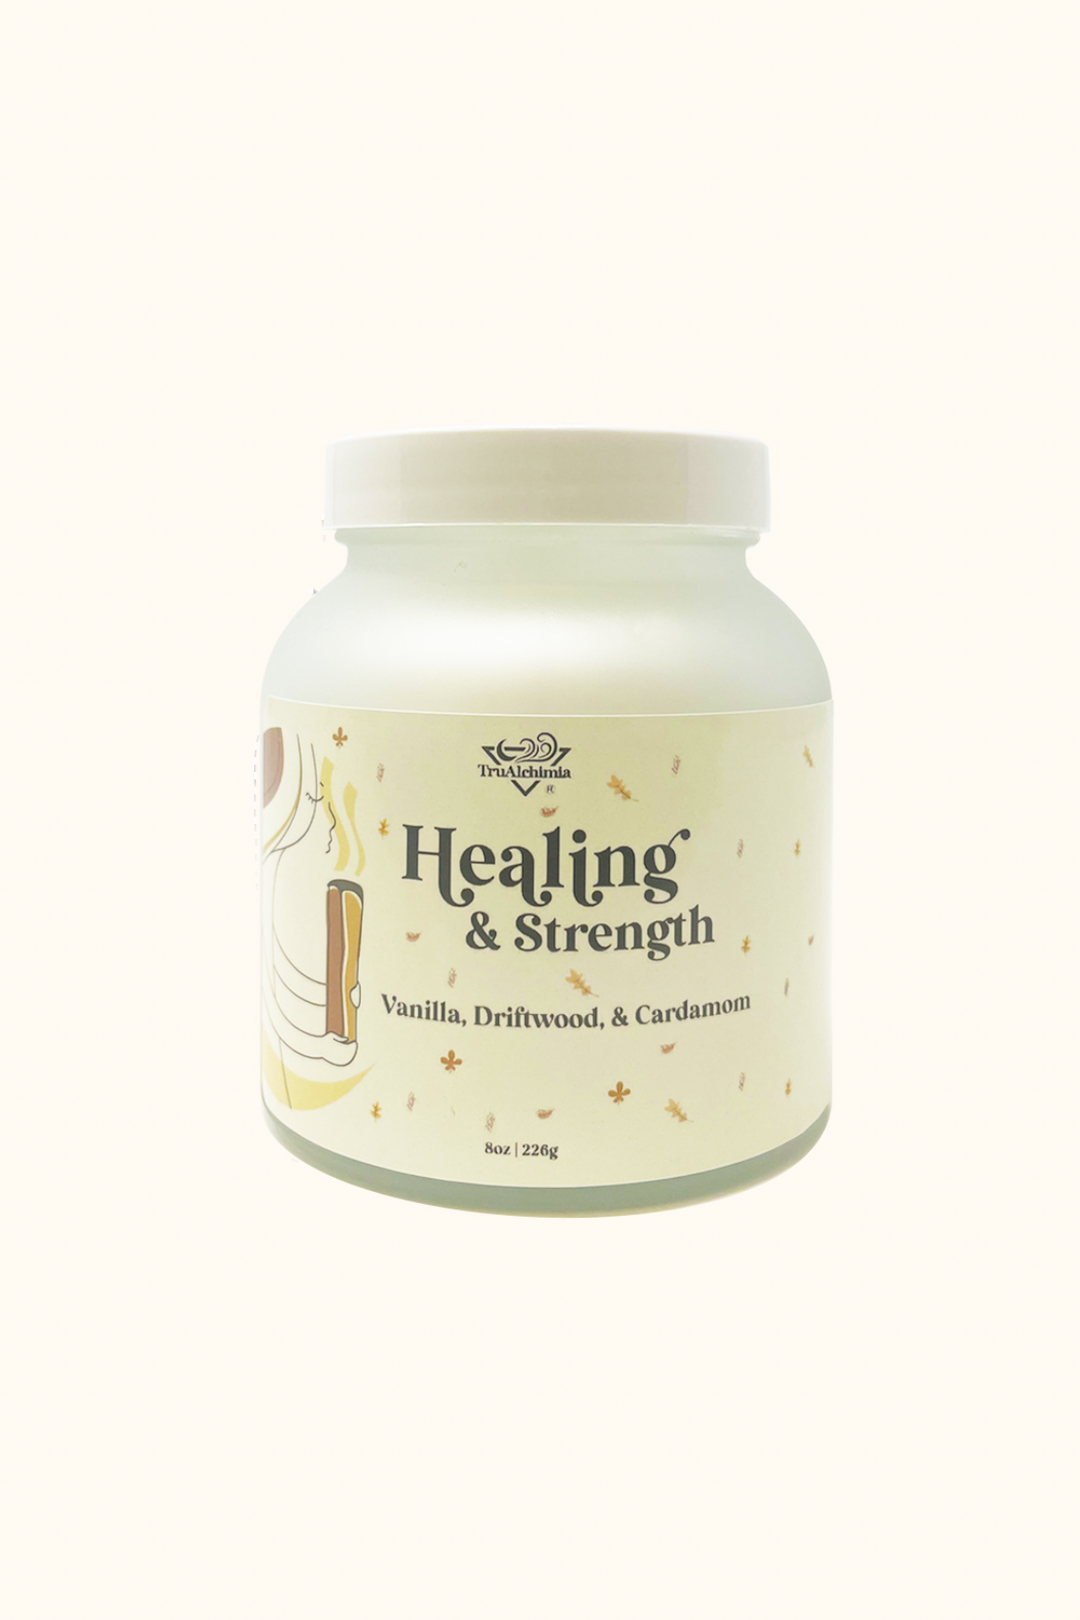 Healing & Strength Candle